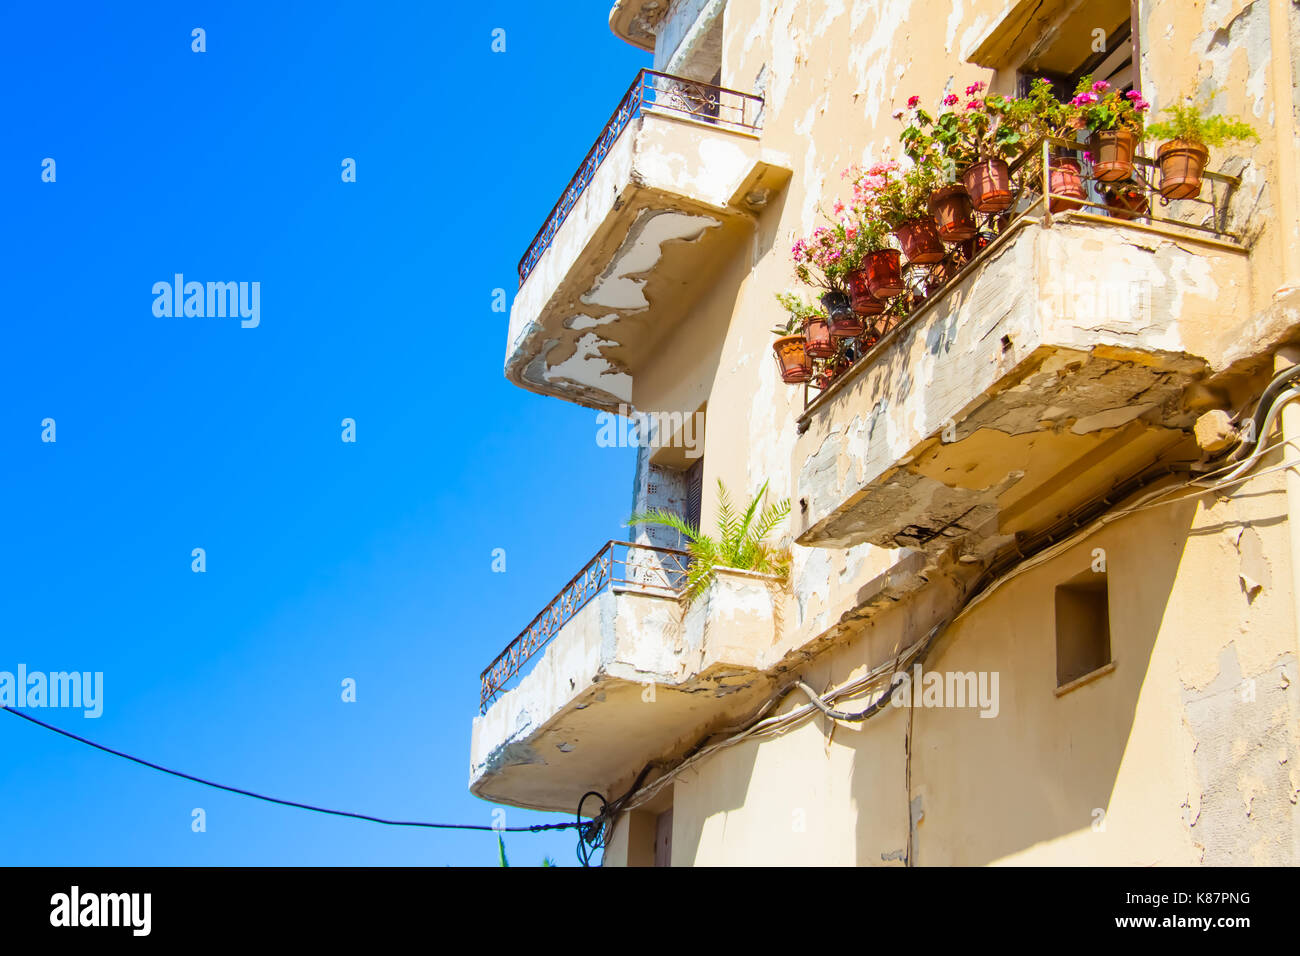 Shabby but picturesque balcony of an old building decorated with pink flowers in the pots in the old town of Rethymno, Crete, Greece Stock Photo